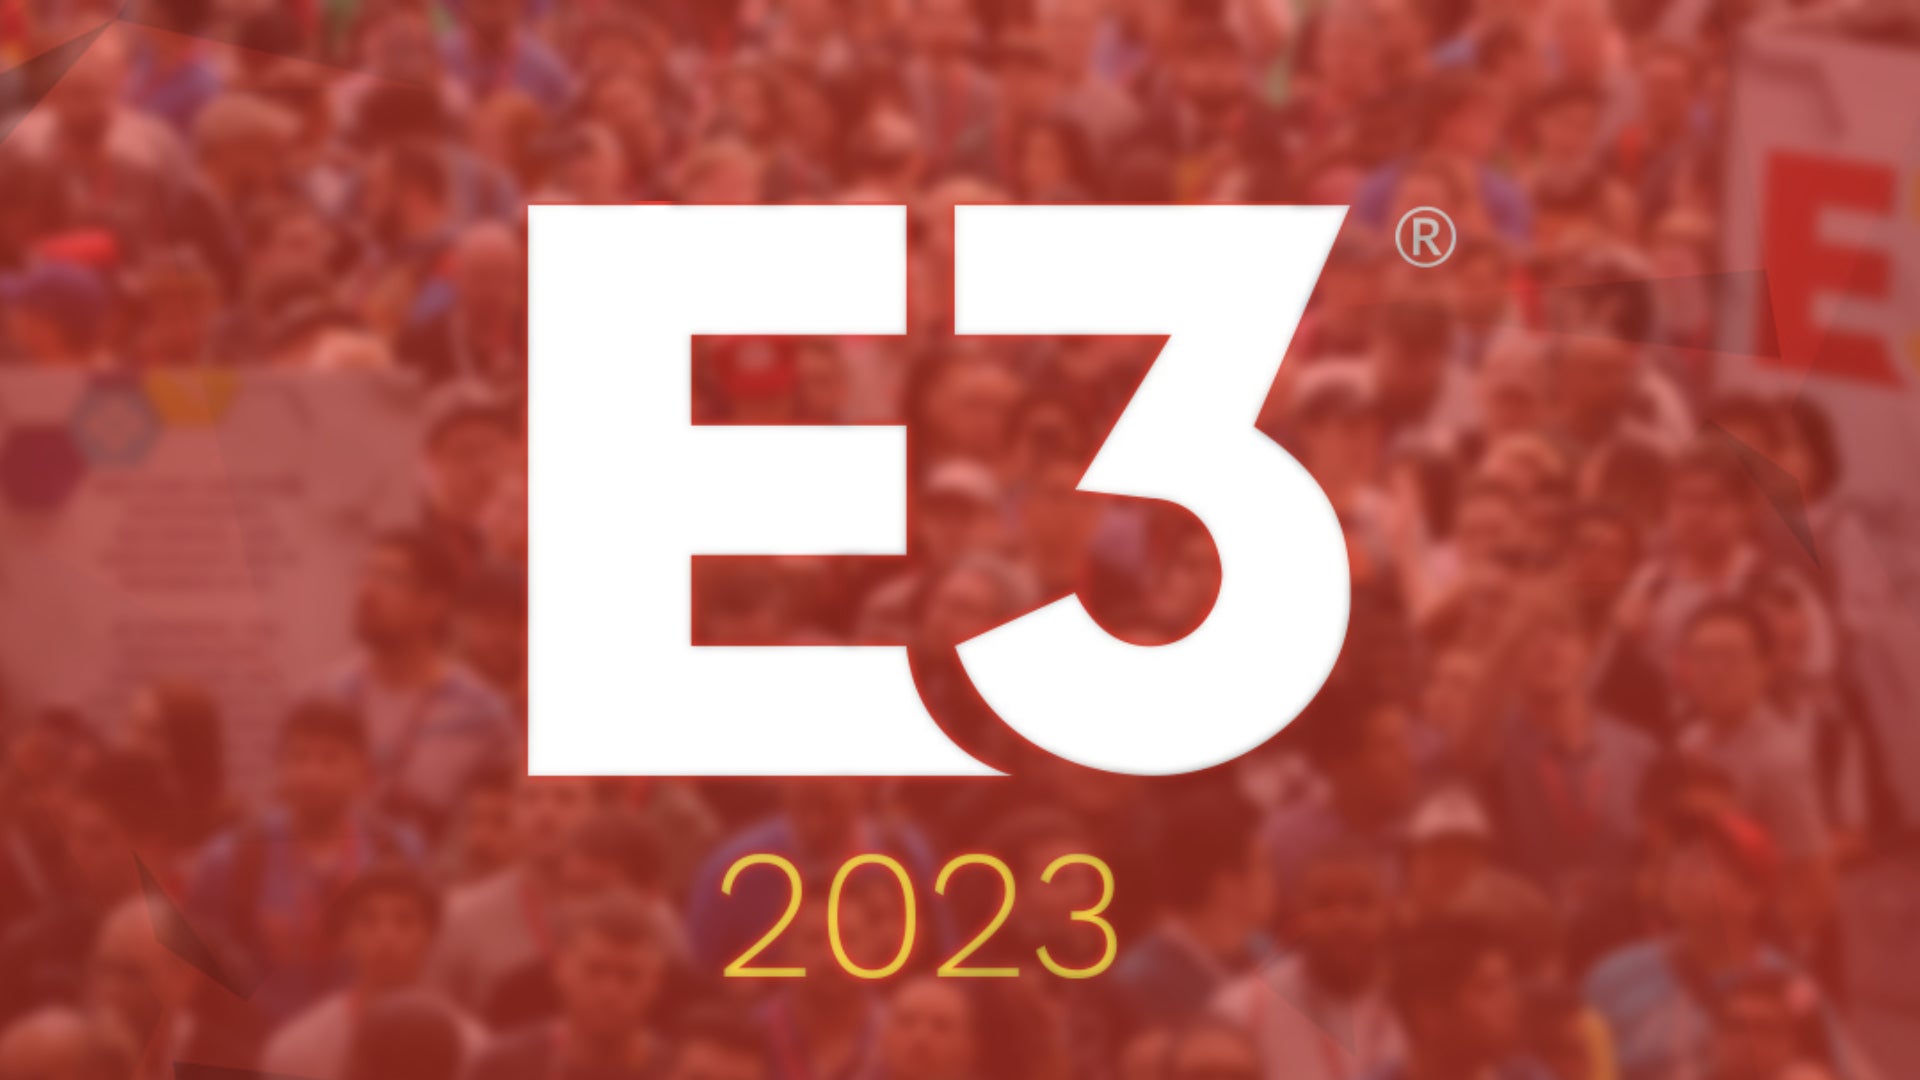 Image for E3 2023 industry and gamer days detailed, more showcase announcements ‘coming soon’